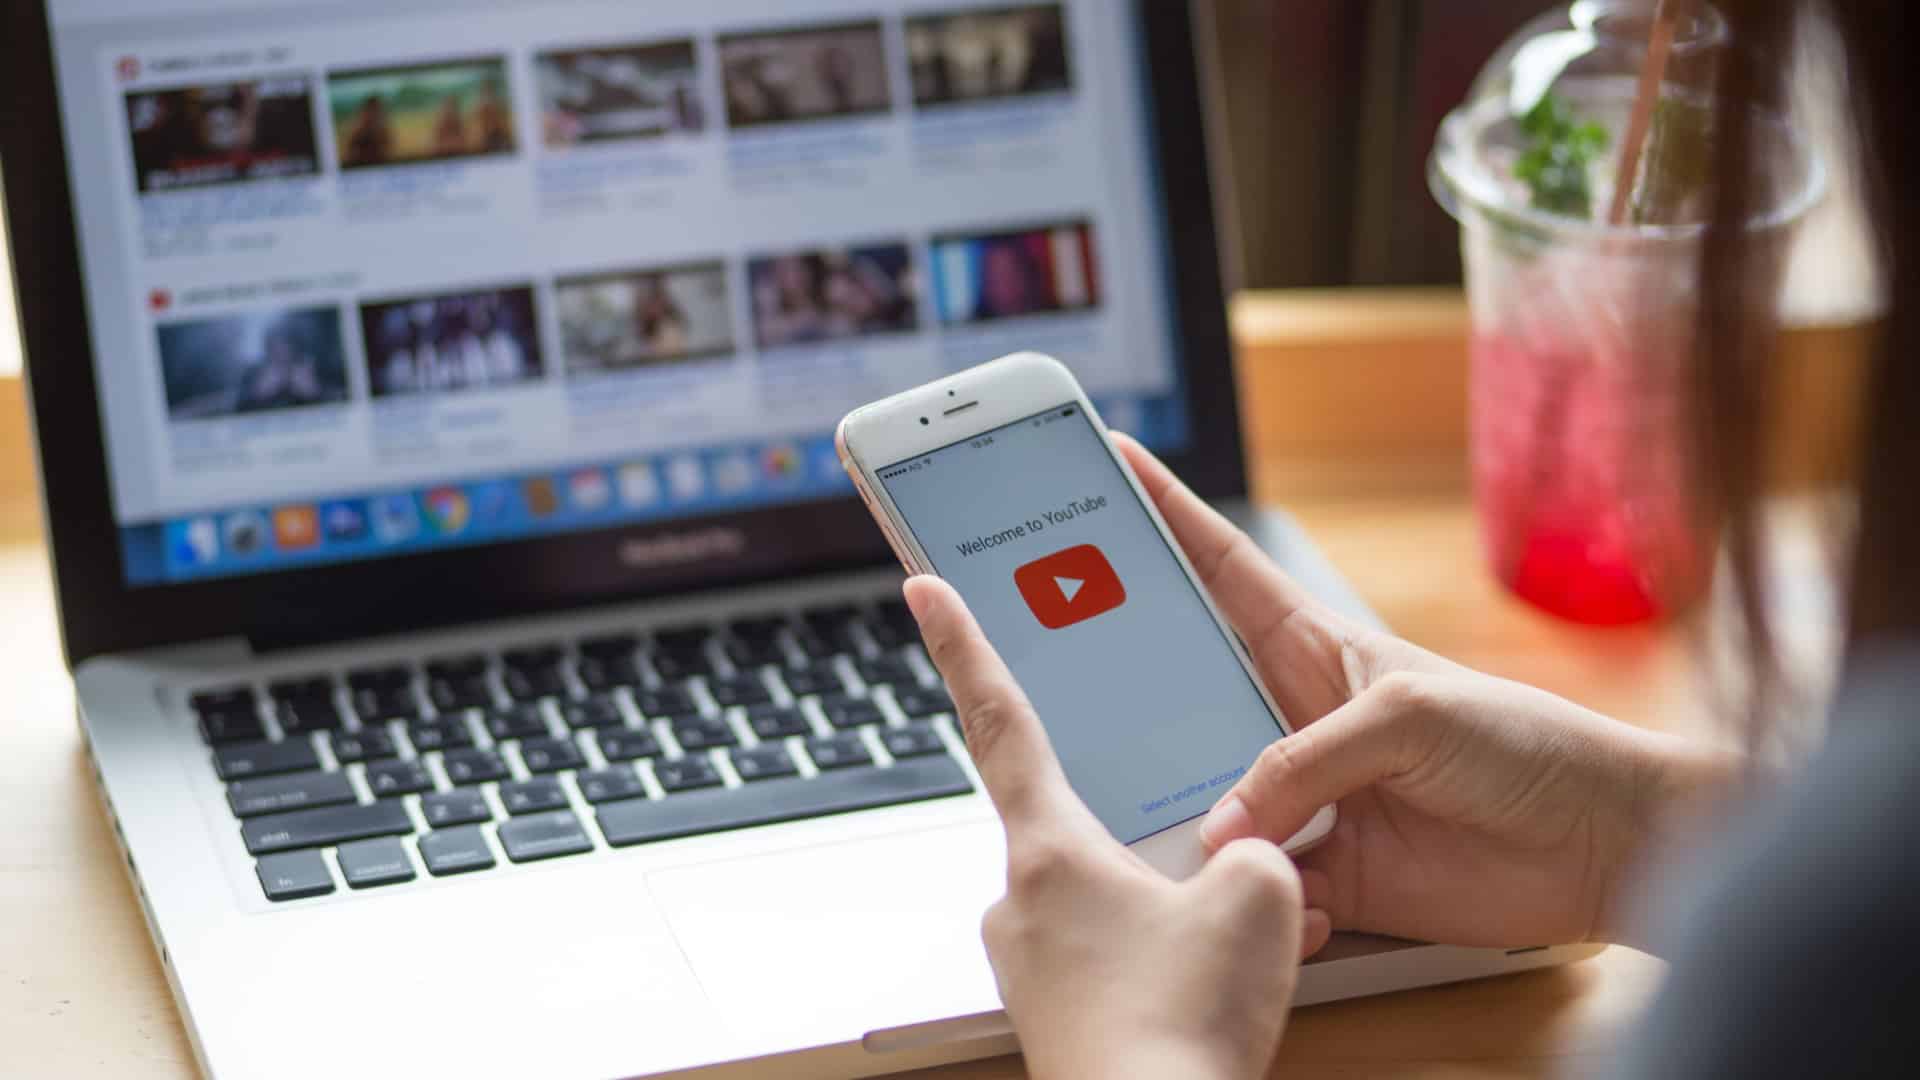 YouTube enables linking between Shorts and long-form videos